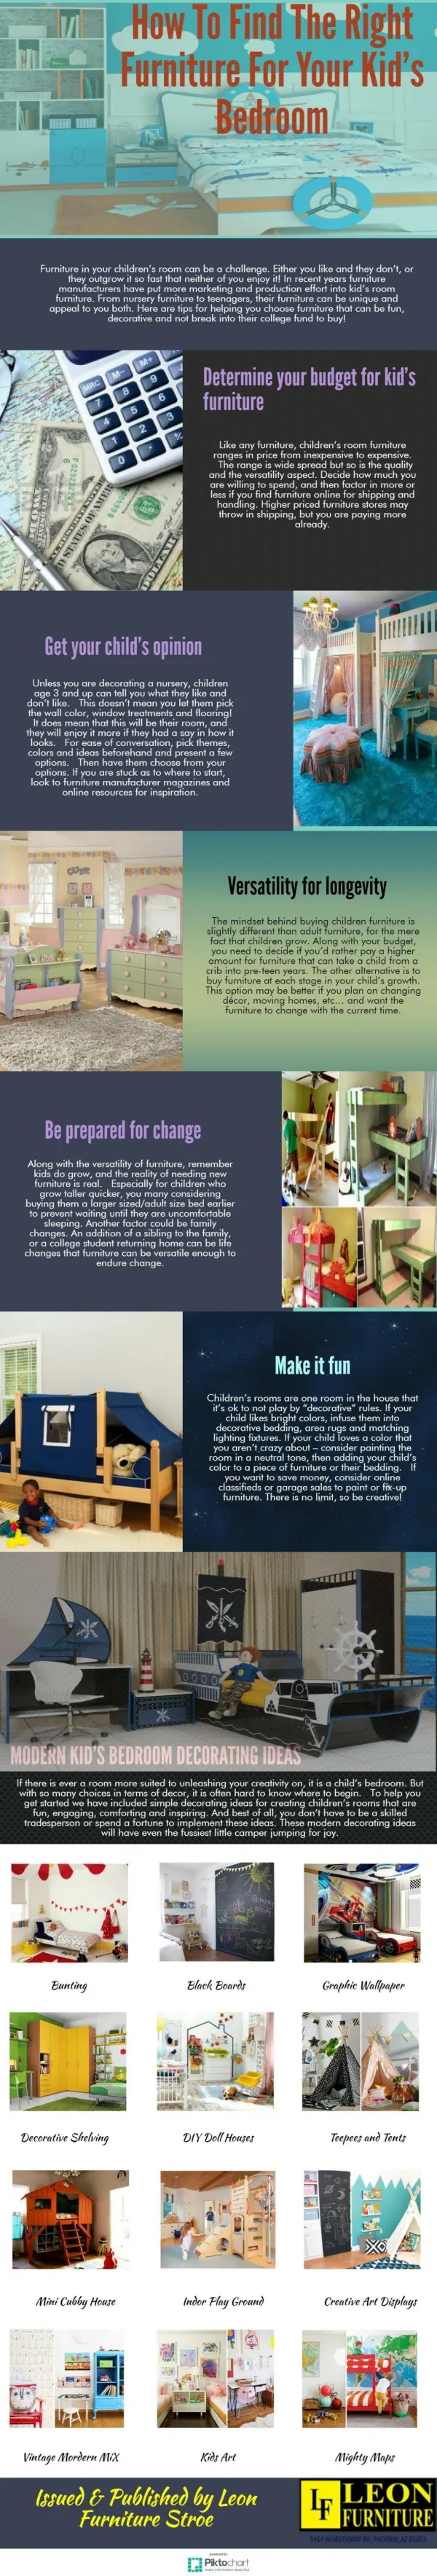 How To Find The Right Furniture For Your Kid’s Bedroom